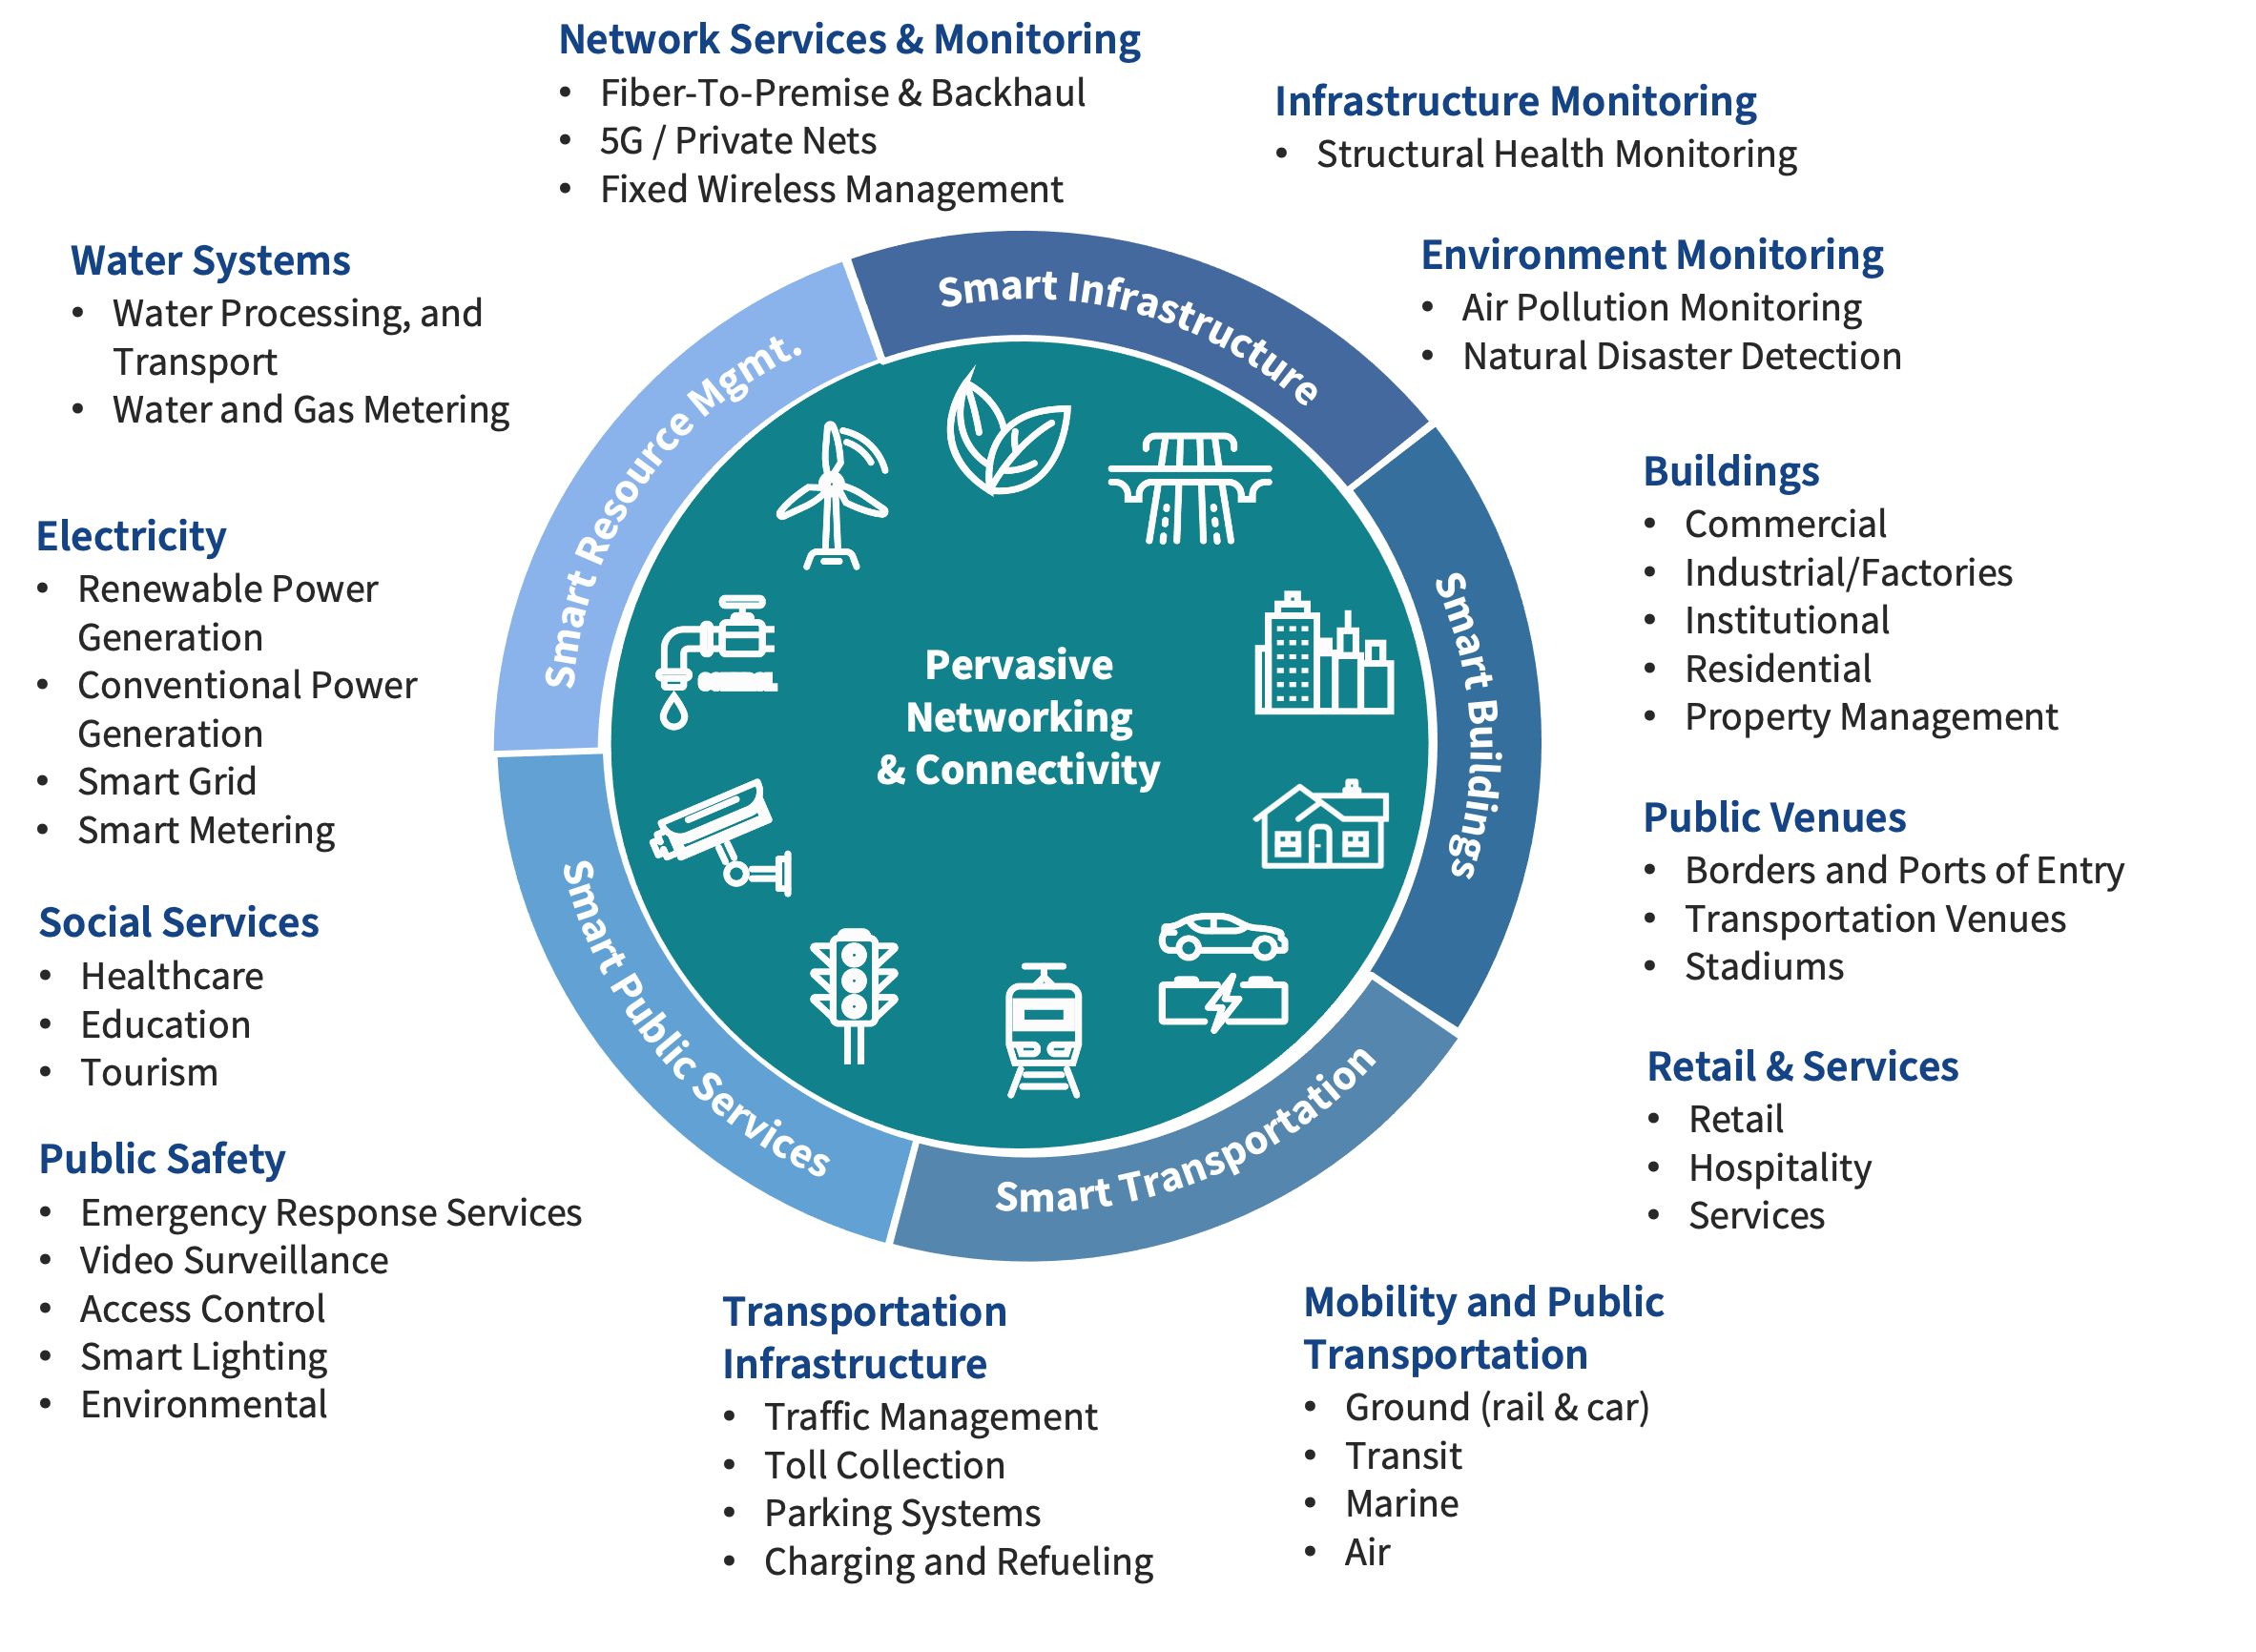 DESIGNING THE FUTURE OF SMART CITIES INFRASTRUCTURE | Future Smart City Infrastructure Value Segments